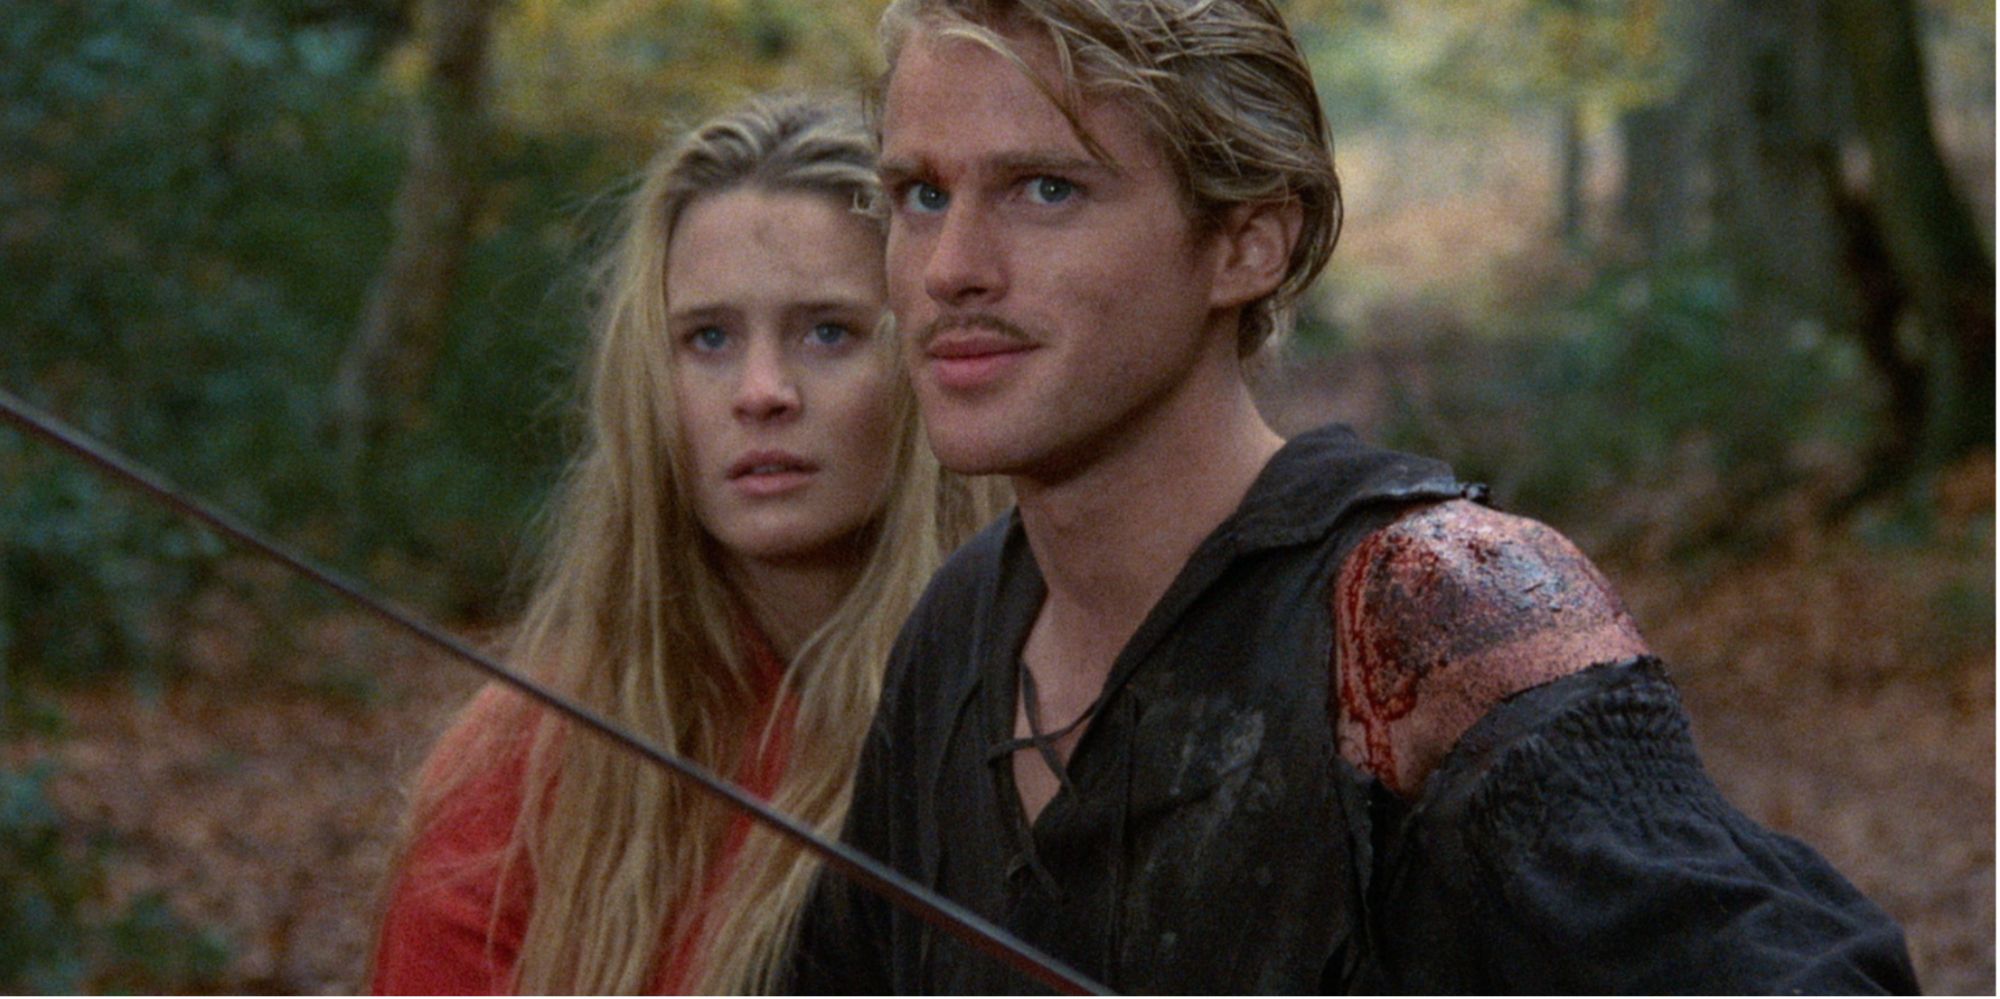 Westley (Cary Elwes) defending Buttercup (Robin Wright) with a sword  in 'The Princess Bride'